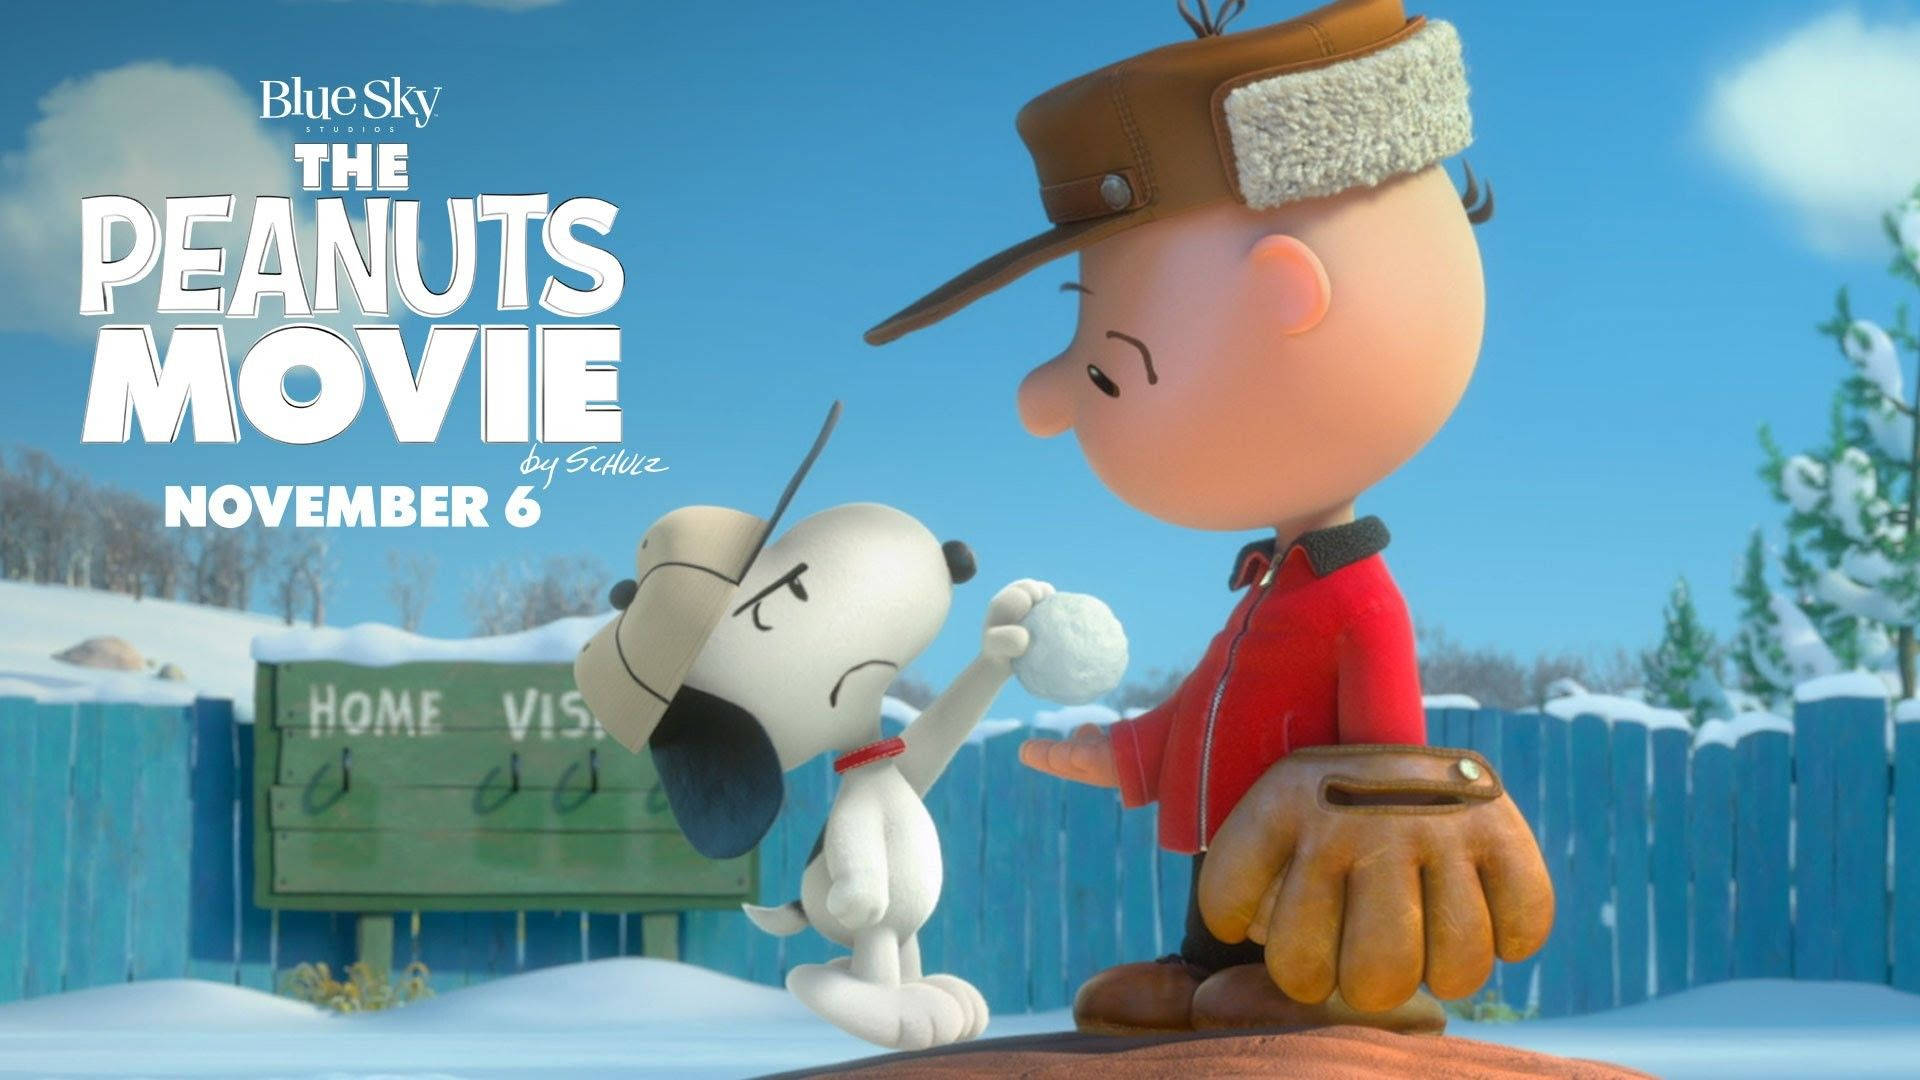 Download The Peanuts Movie Characters On Snow Wallpaper 